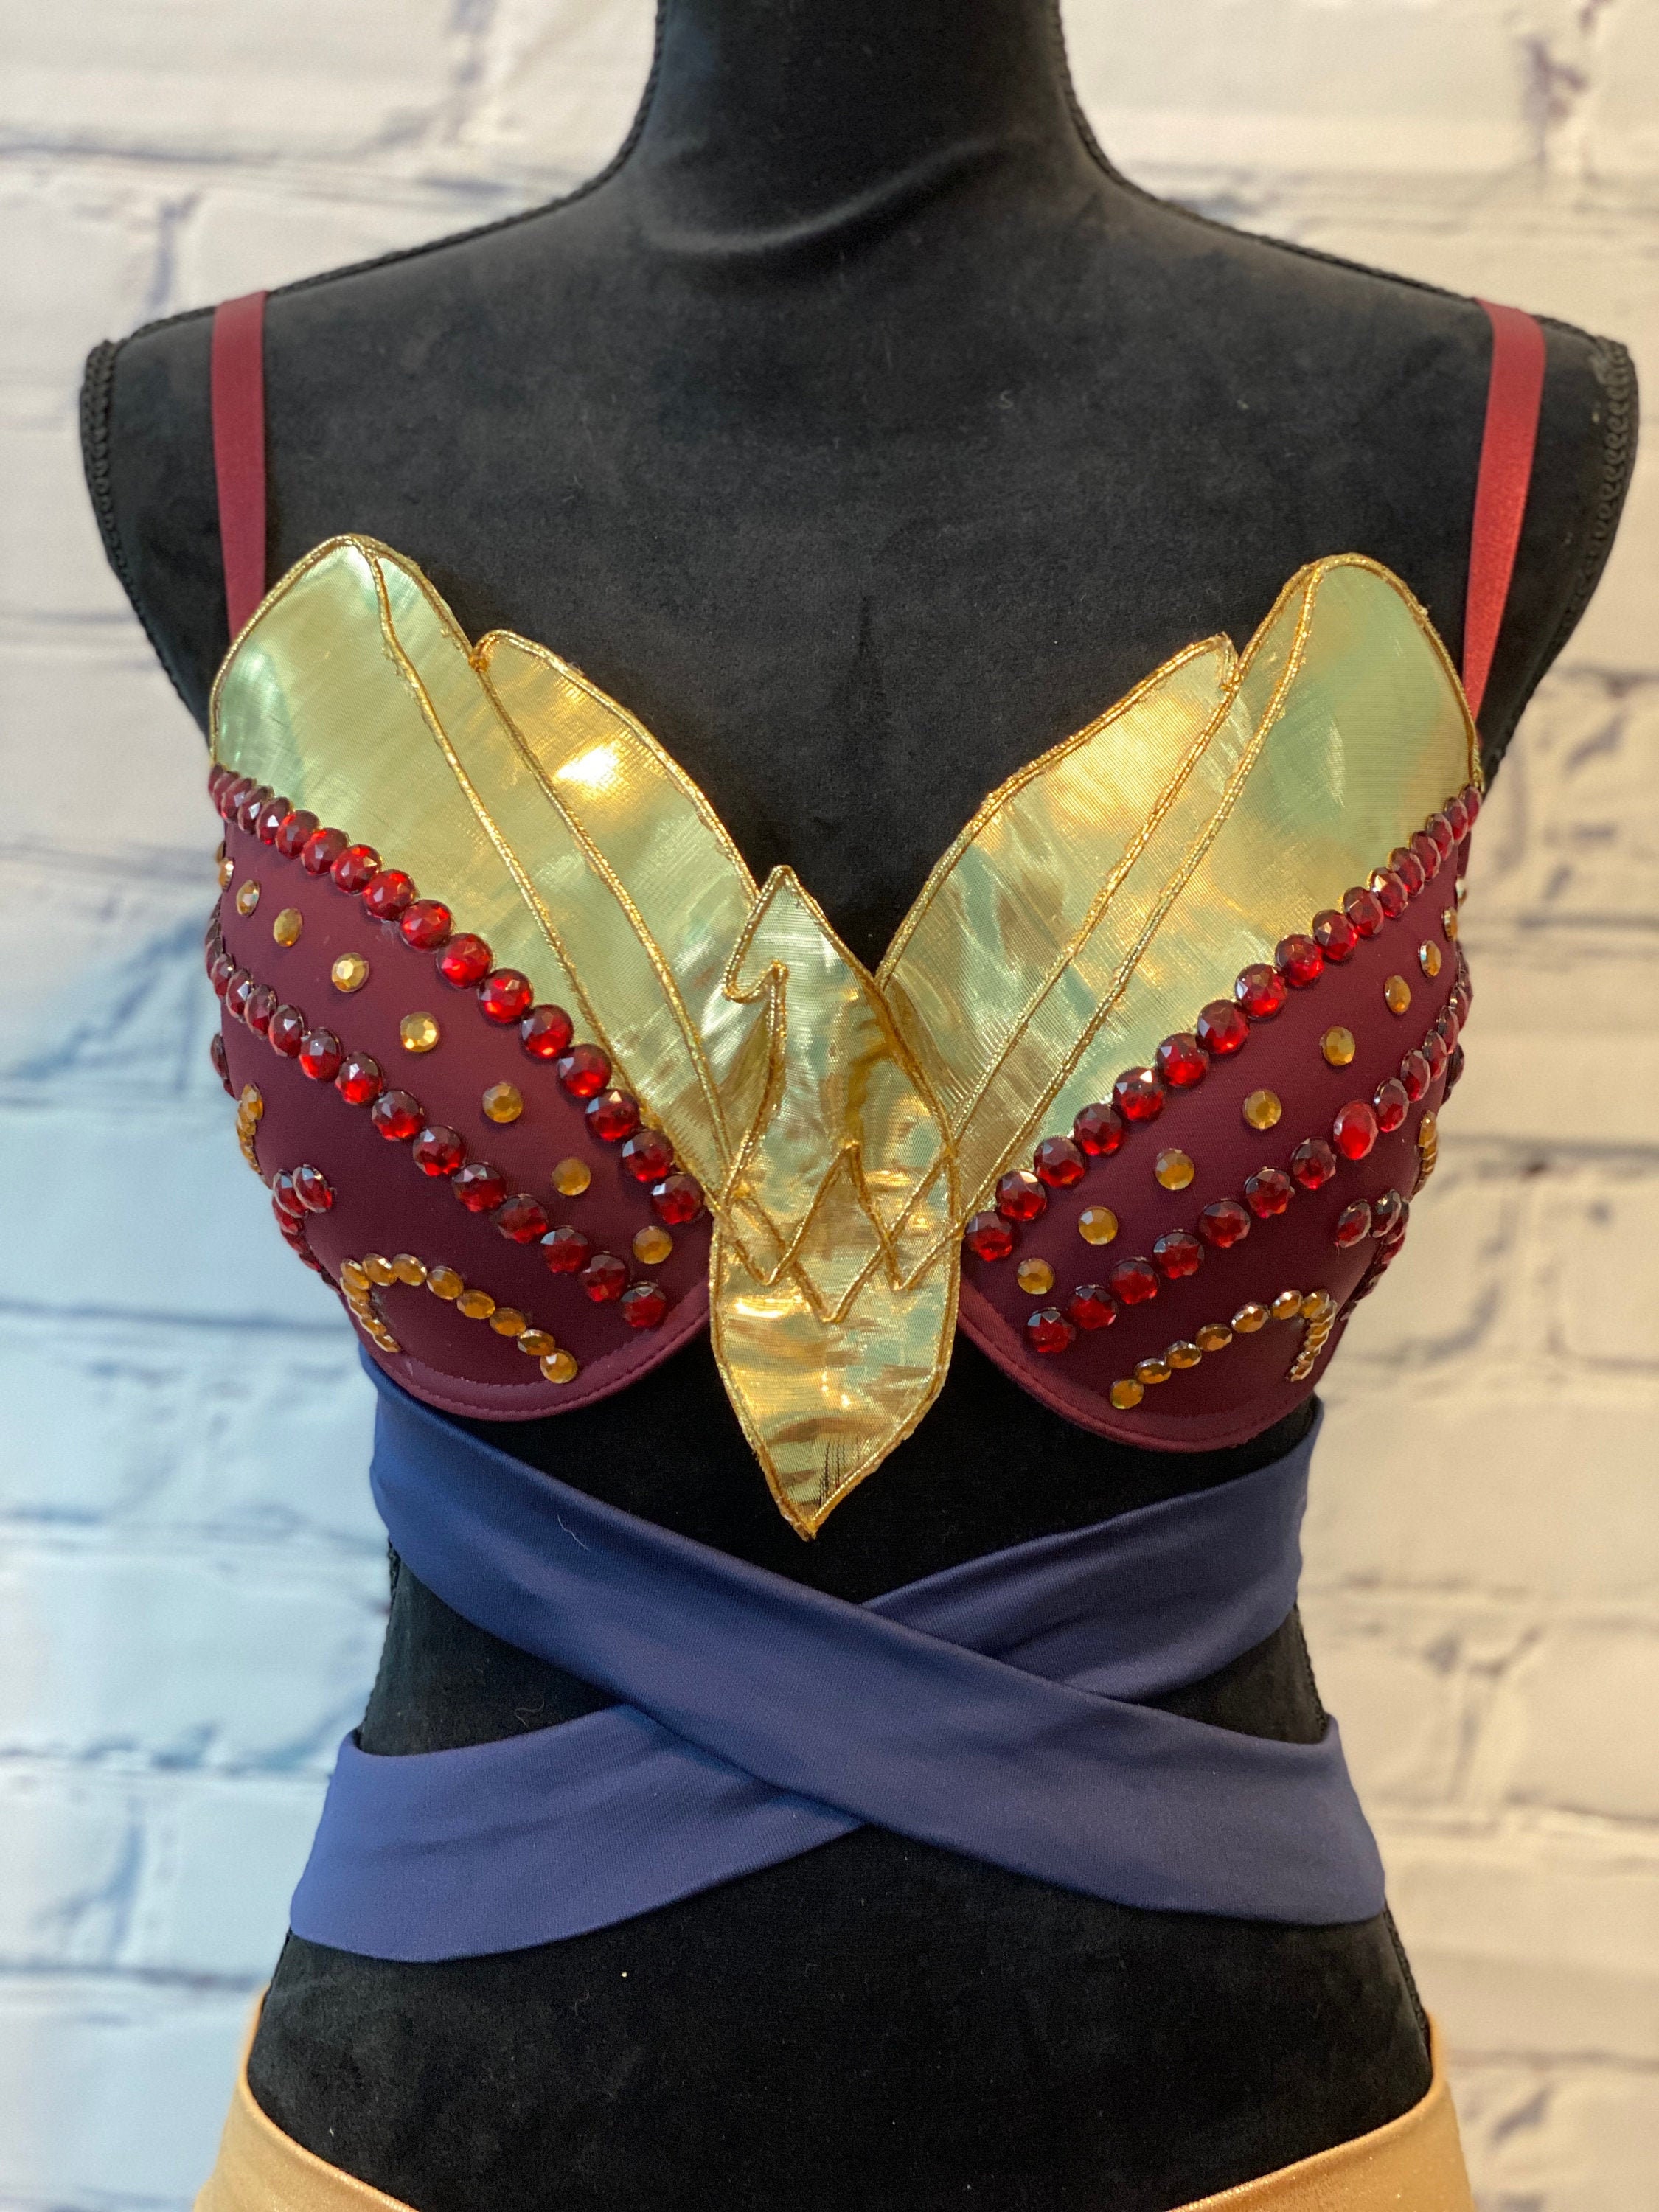 Dc's Wonder Woman Movie Inspired Rave Bra Perfect for a Rave